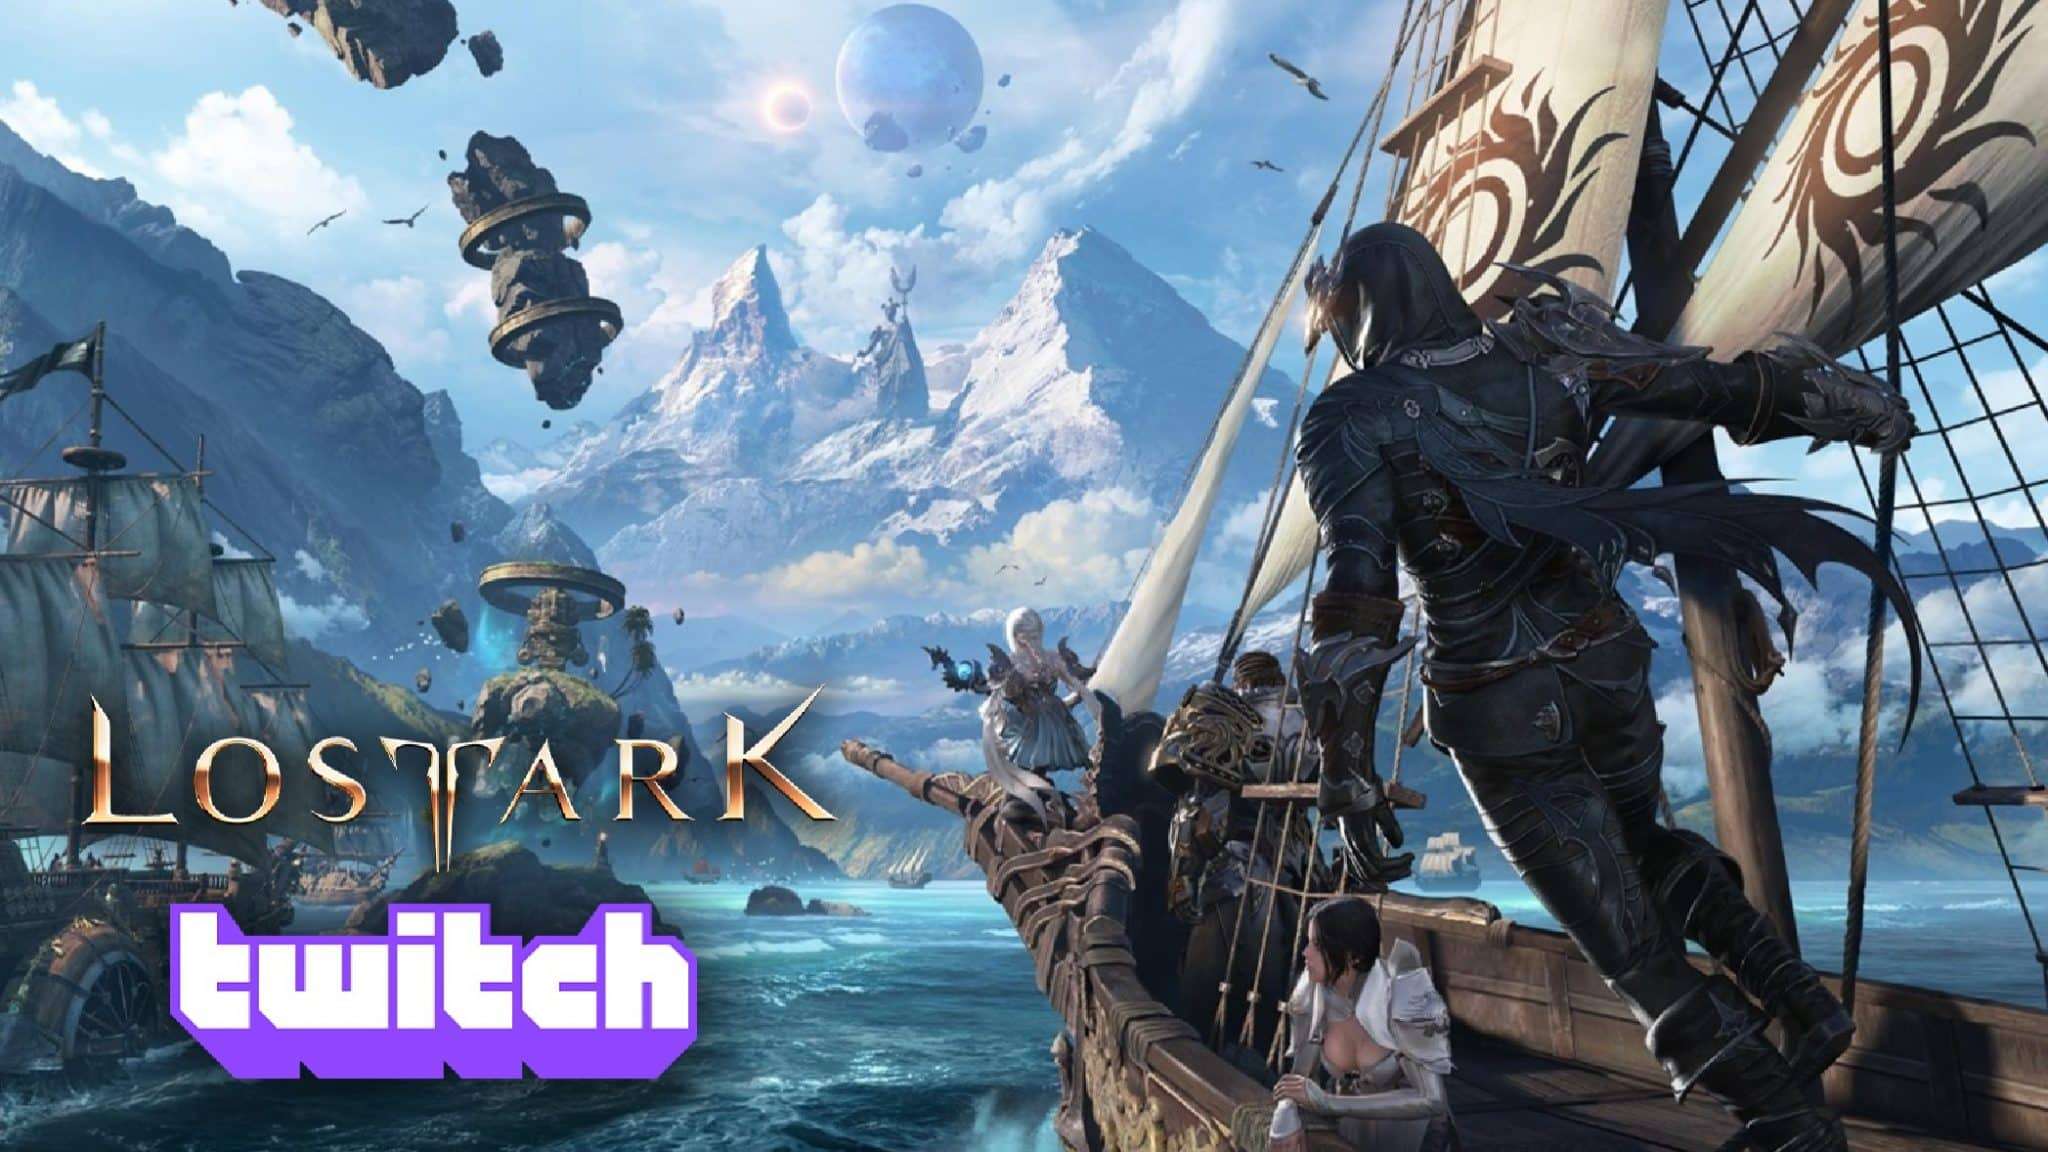 Lost Ark gameplay on Twitch